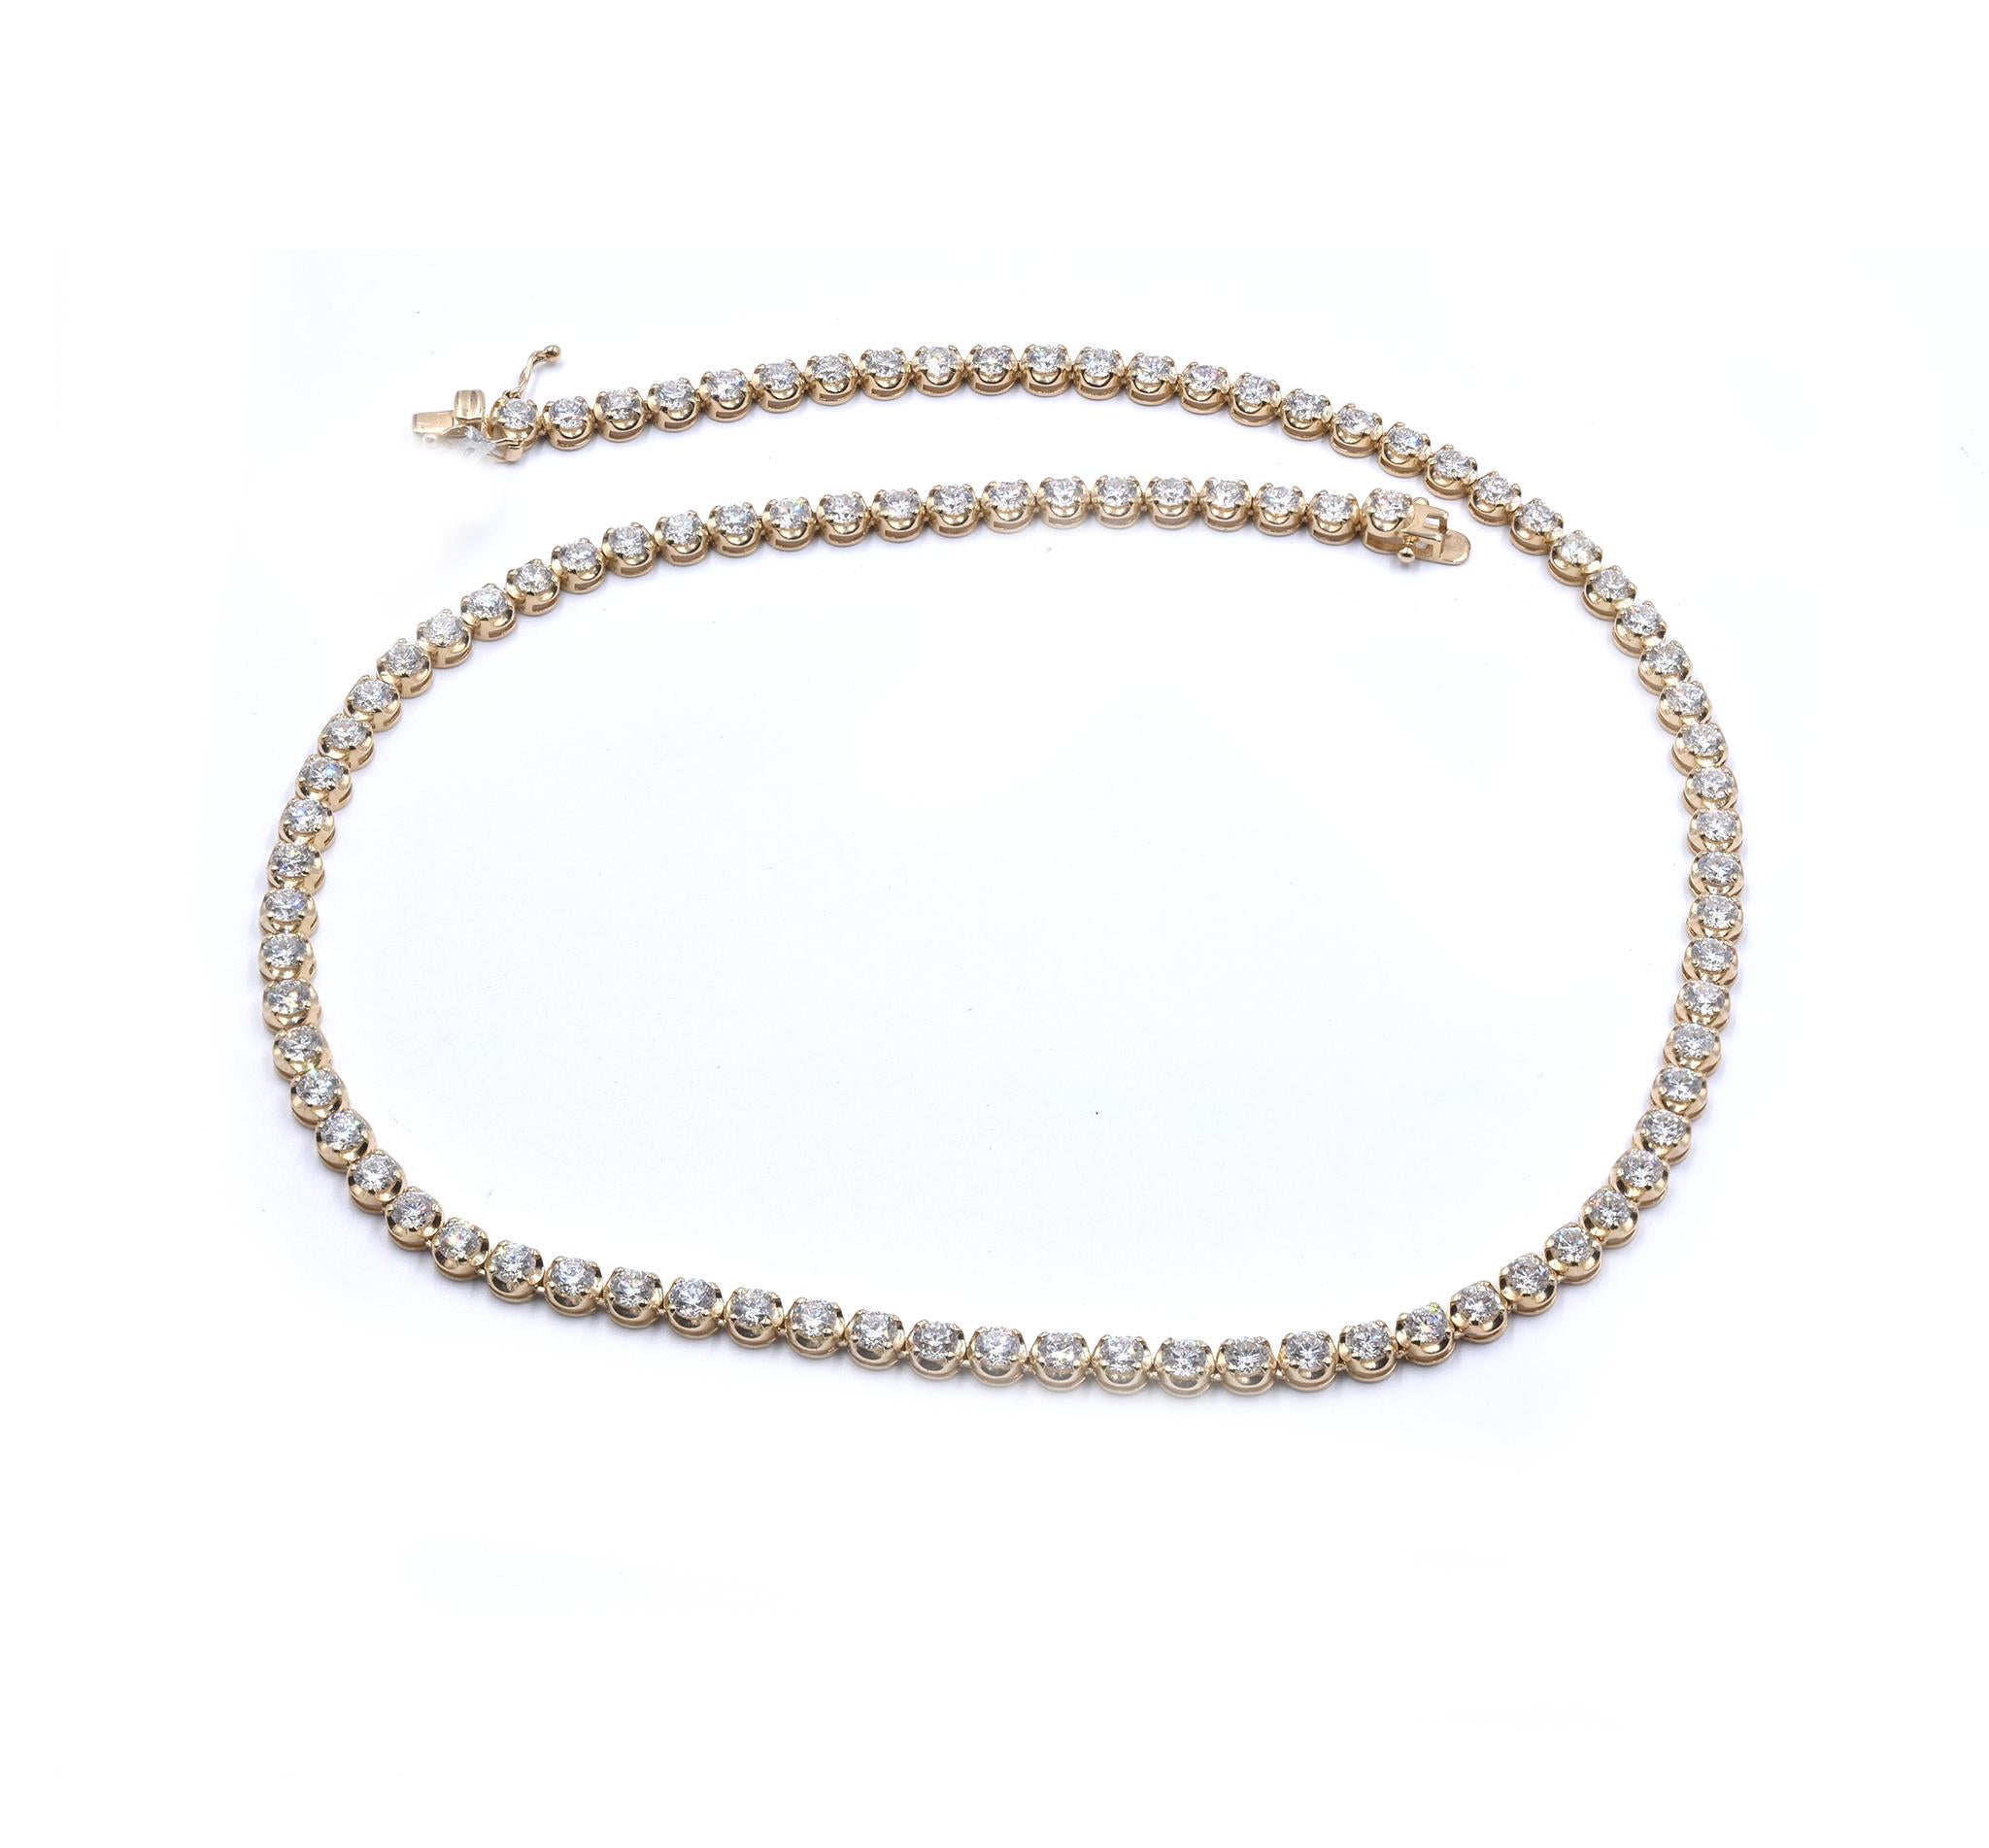 14 Karat Yellow Gold Diamond Tennis Necklace In Excellent Condition For Sale In Scottsdale, AZ